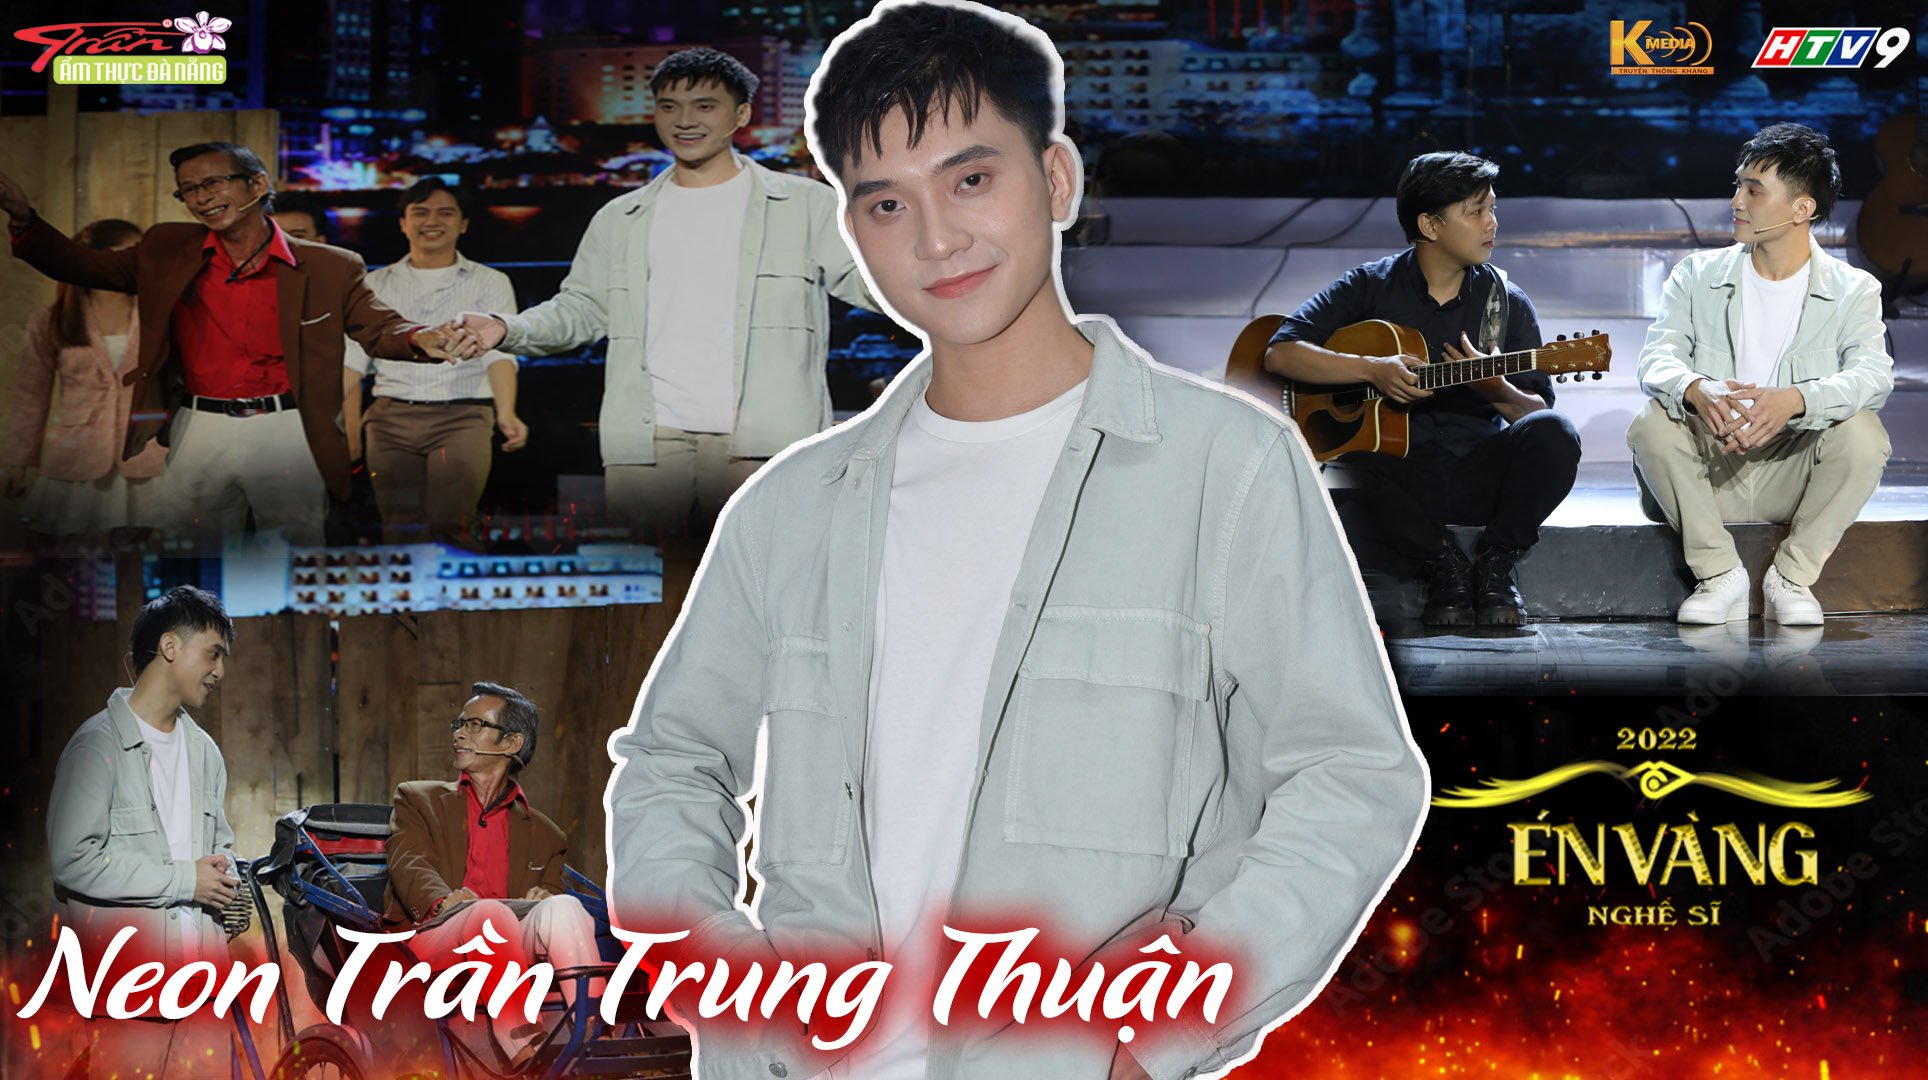 POSTER NEON TRẦN TRUNG THUẬN